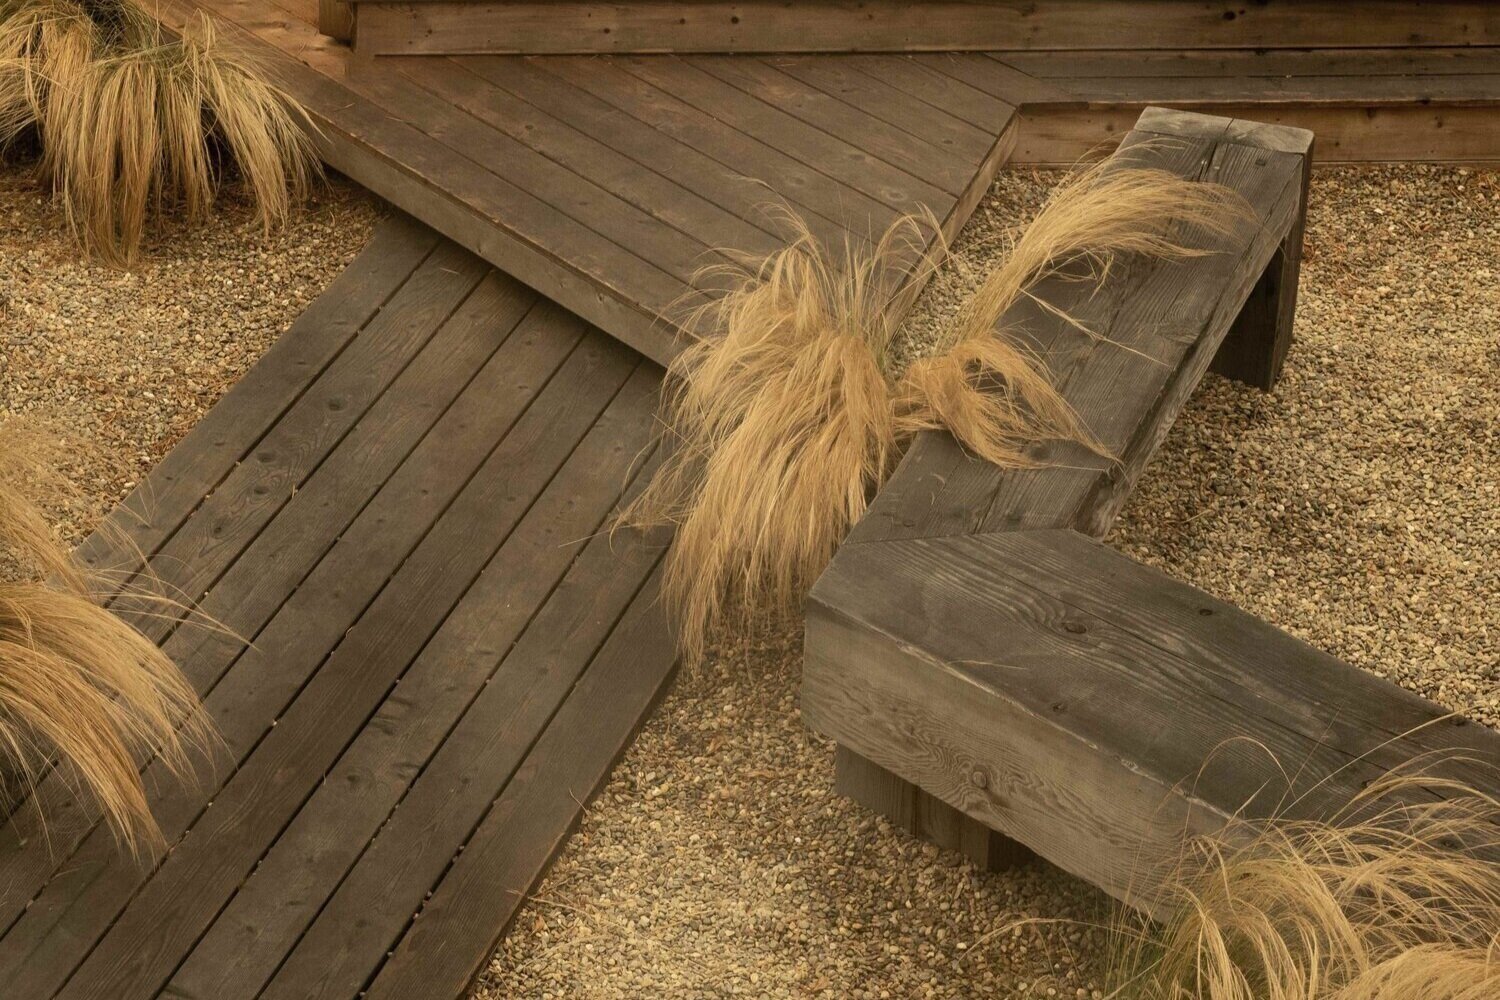 Intersecting layers of deck with long grasses as accents.